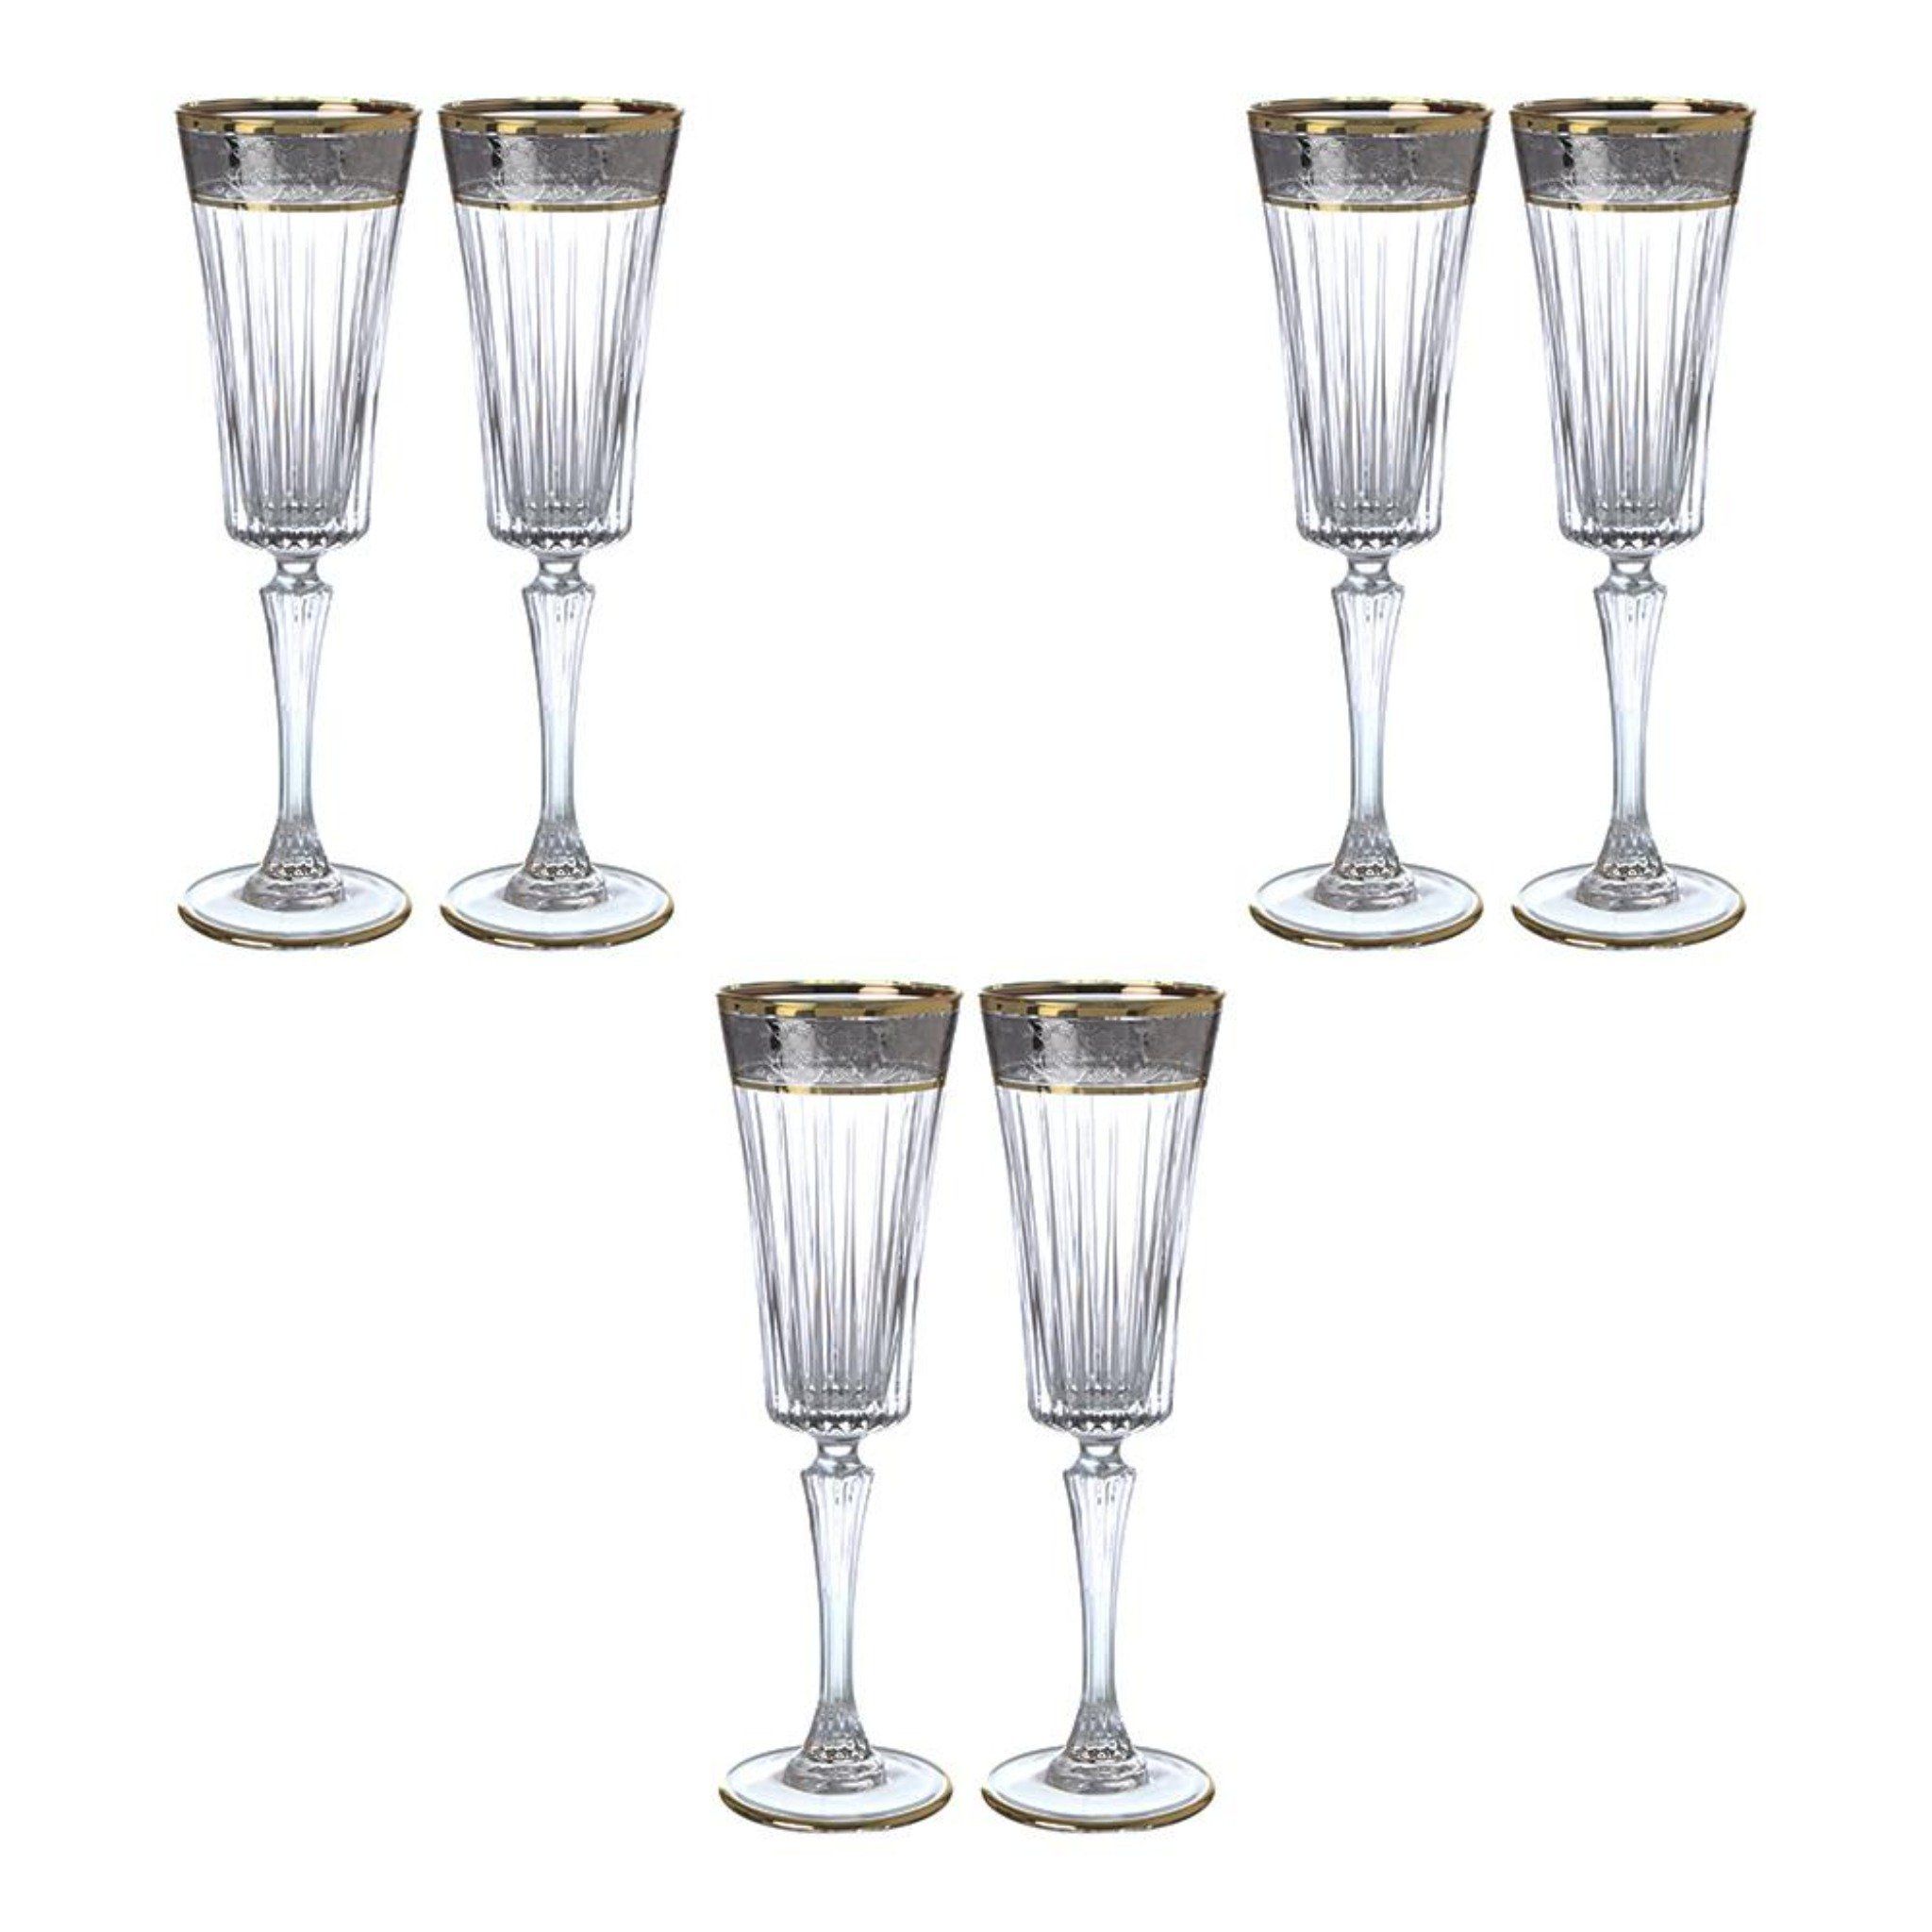 RCR Italy - Flute Glass Set 6 Pieces - Silver & Gold - 210ml - 380003123